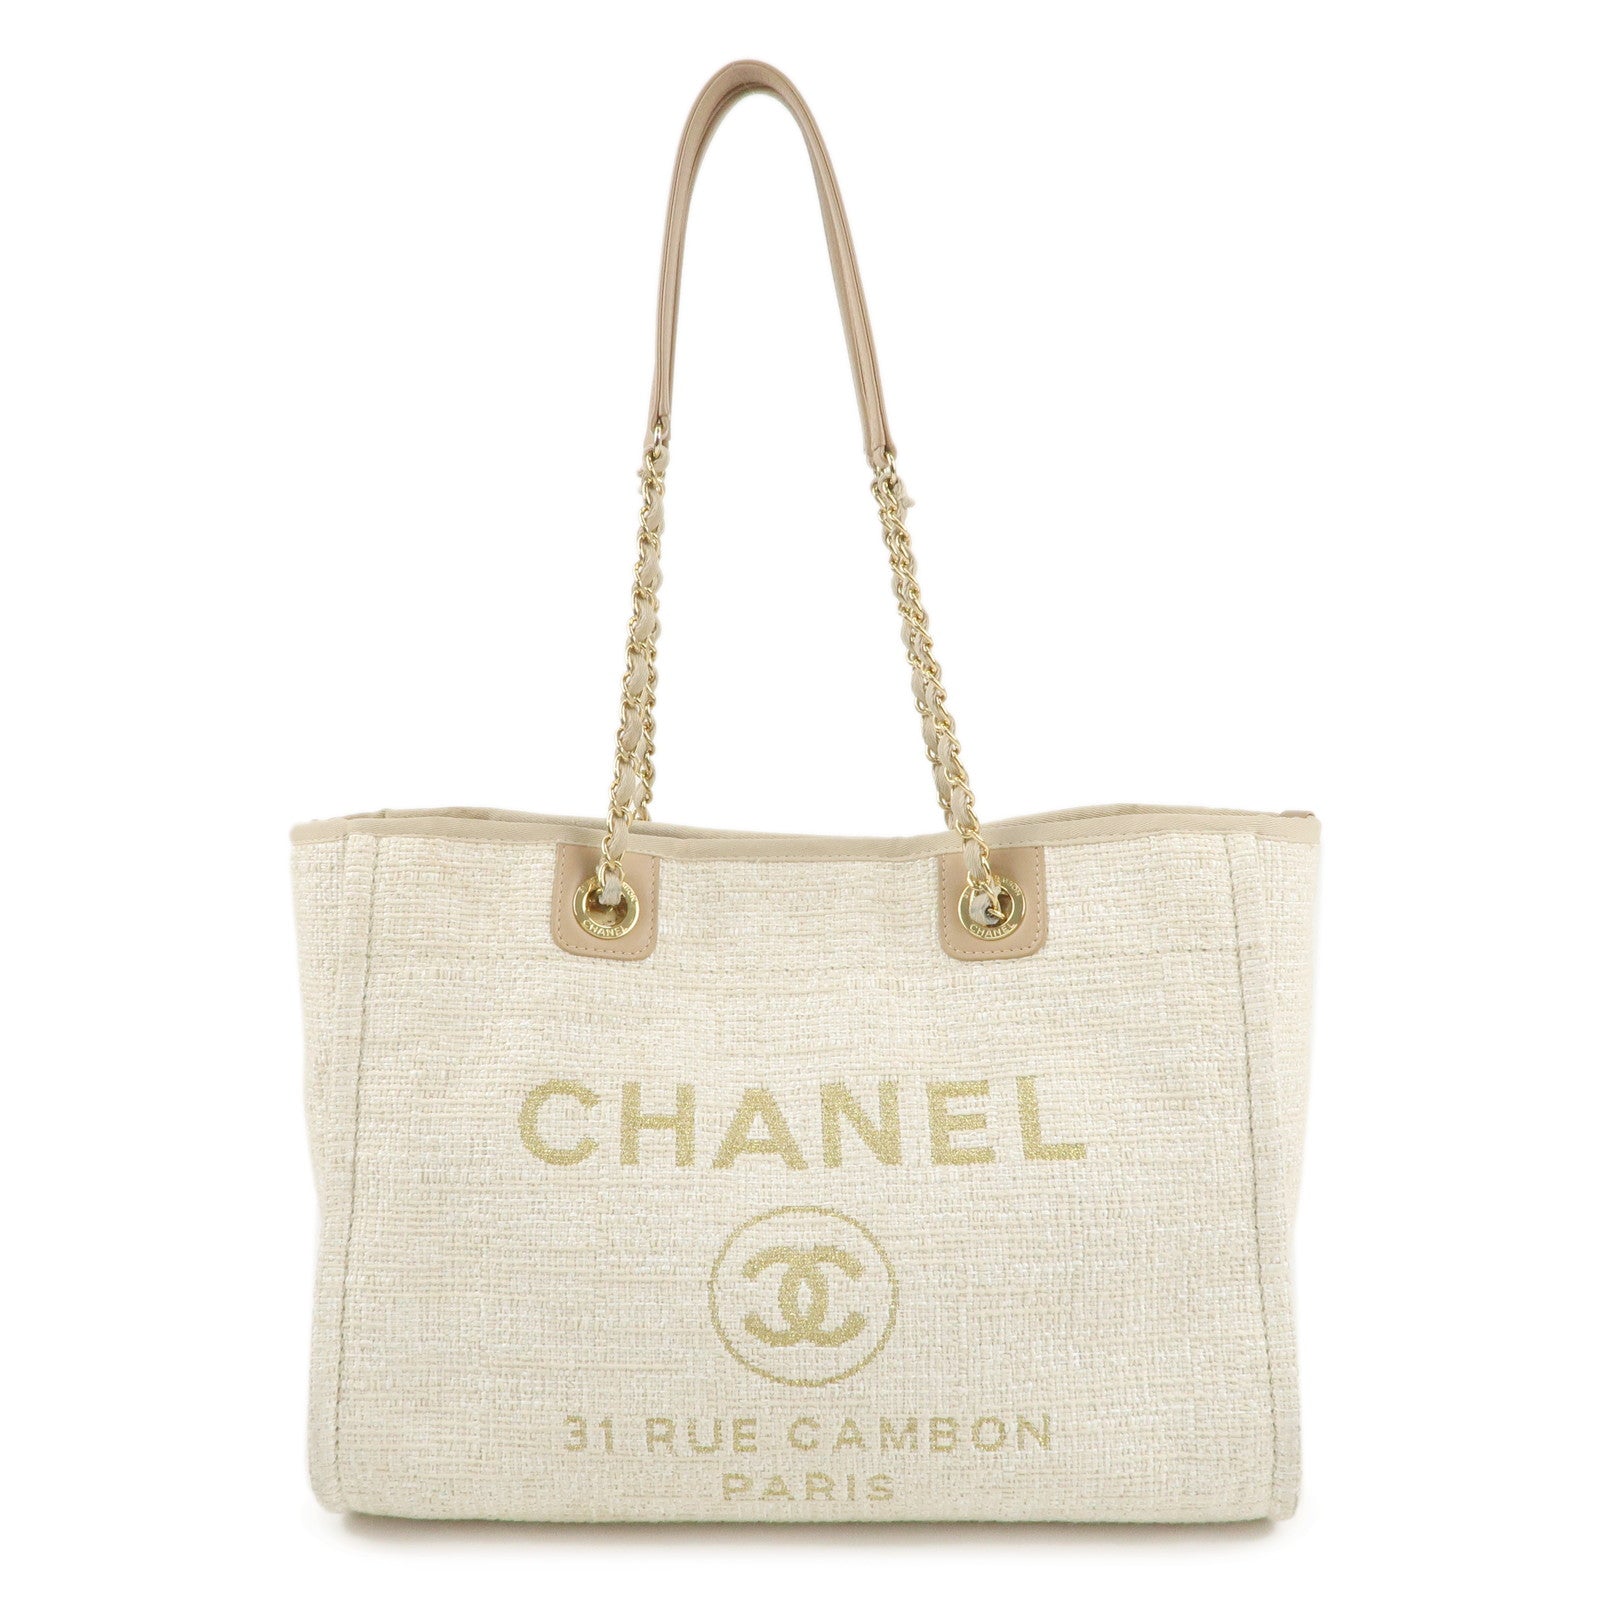 CHANEL-Deauville-Canvas-Leather-Tote-Bag-MM-Beige-Gold-A67001